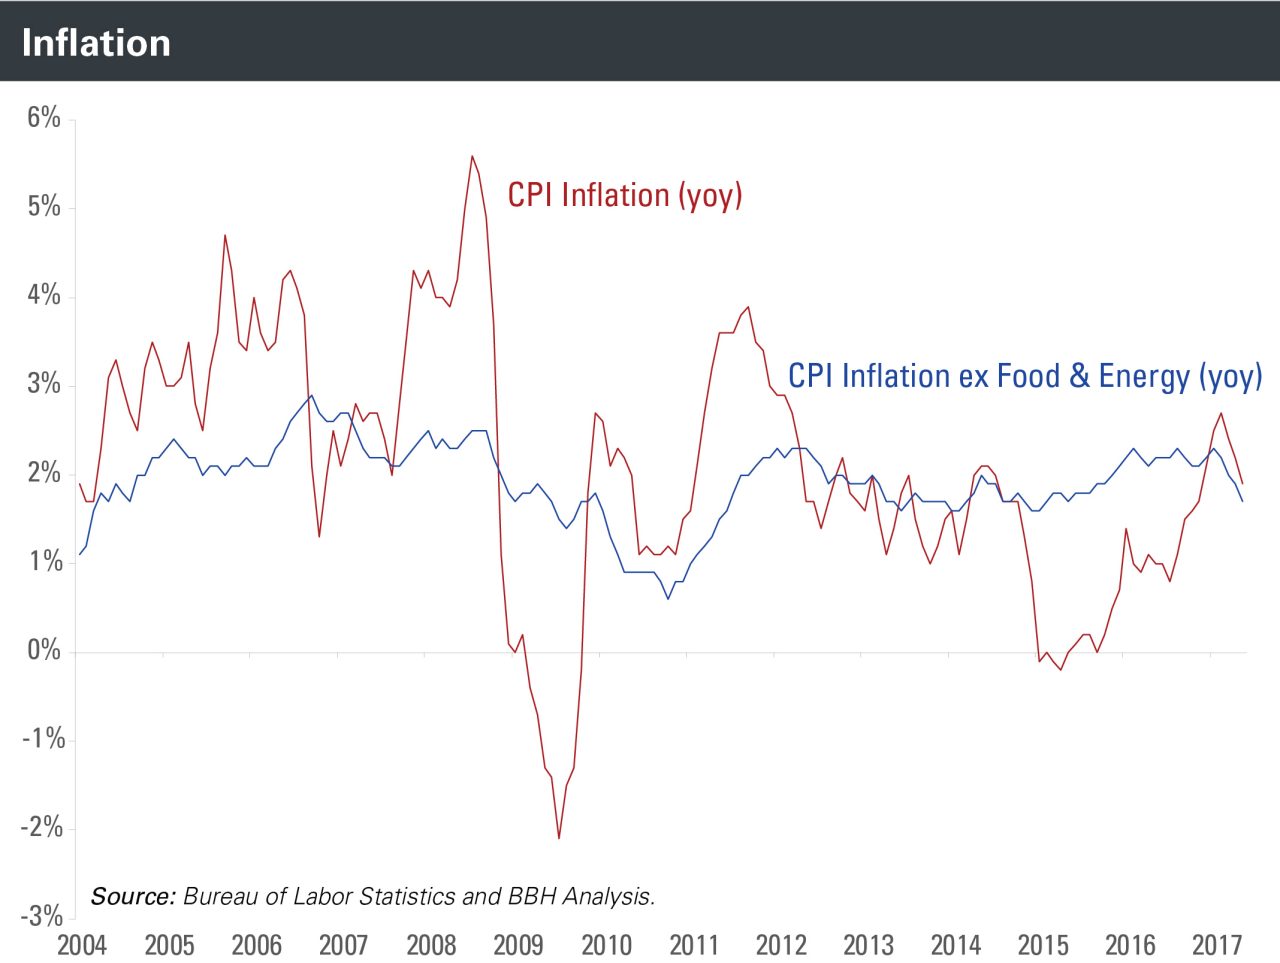 CPI Inflation & CPI Inflation ex. Food & Energy from 2004 to 2017